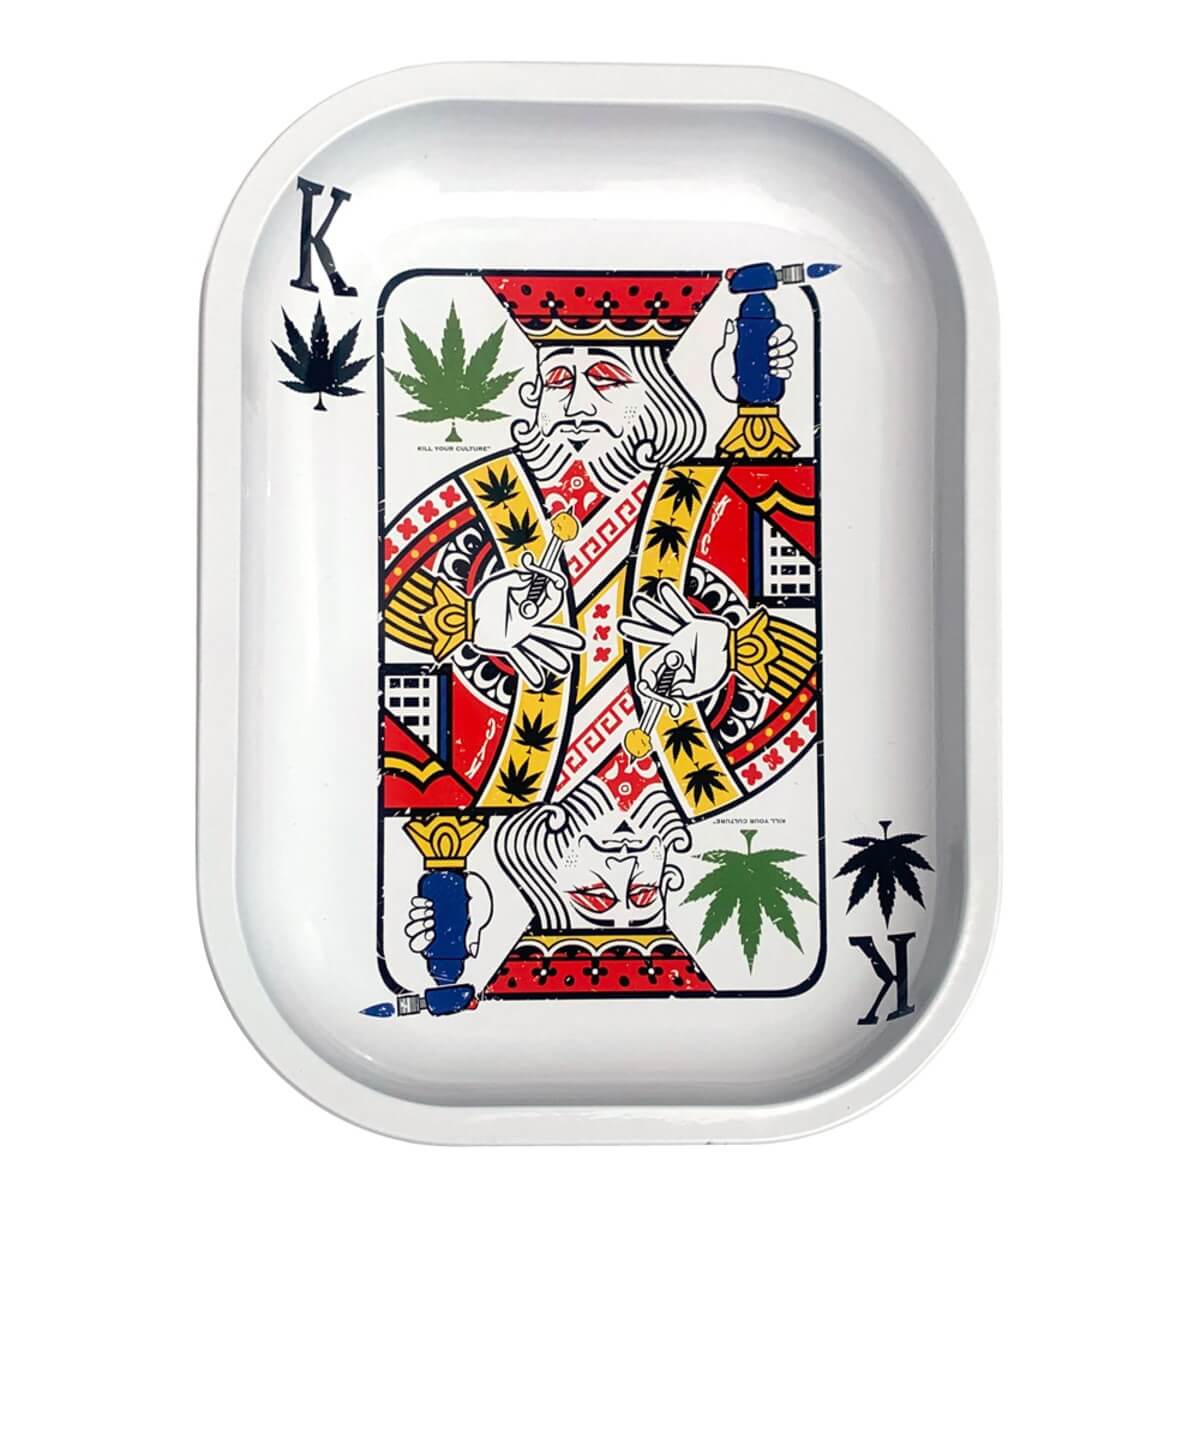 KING OF DABS Metal Tray KillYourCulture